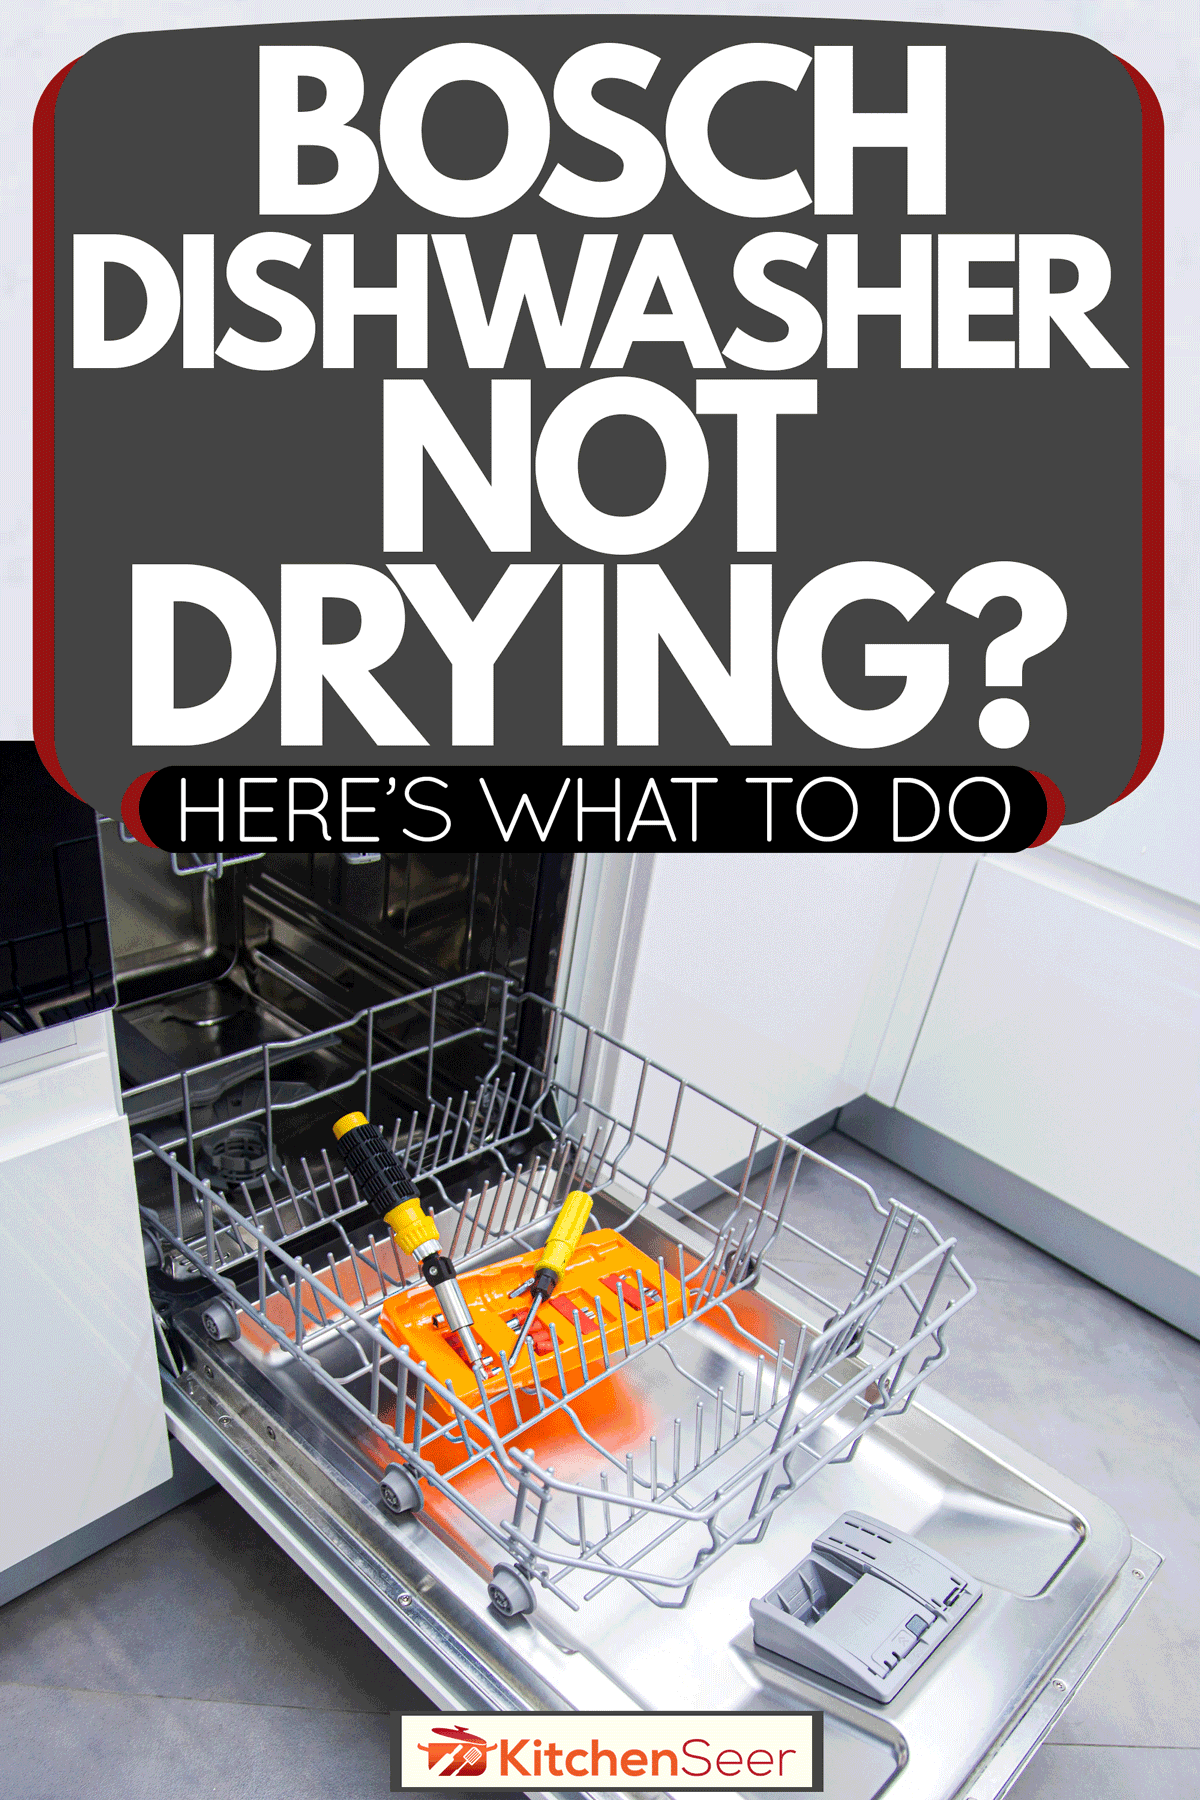 An opened dishwasher due to a broken dryer, Bosch Dishwasher Not Drying? Here's What To Do